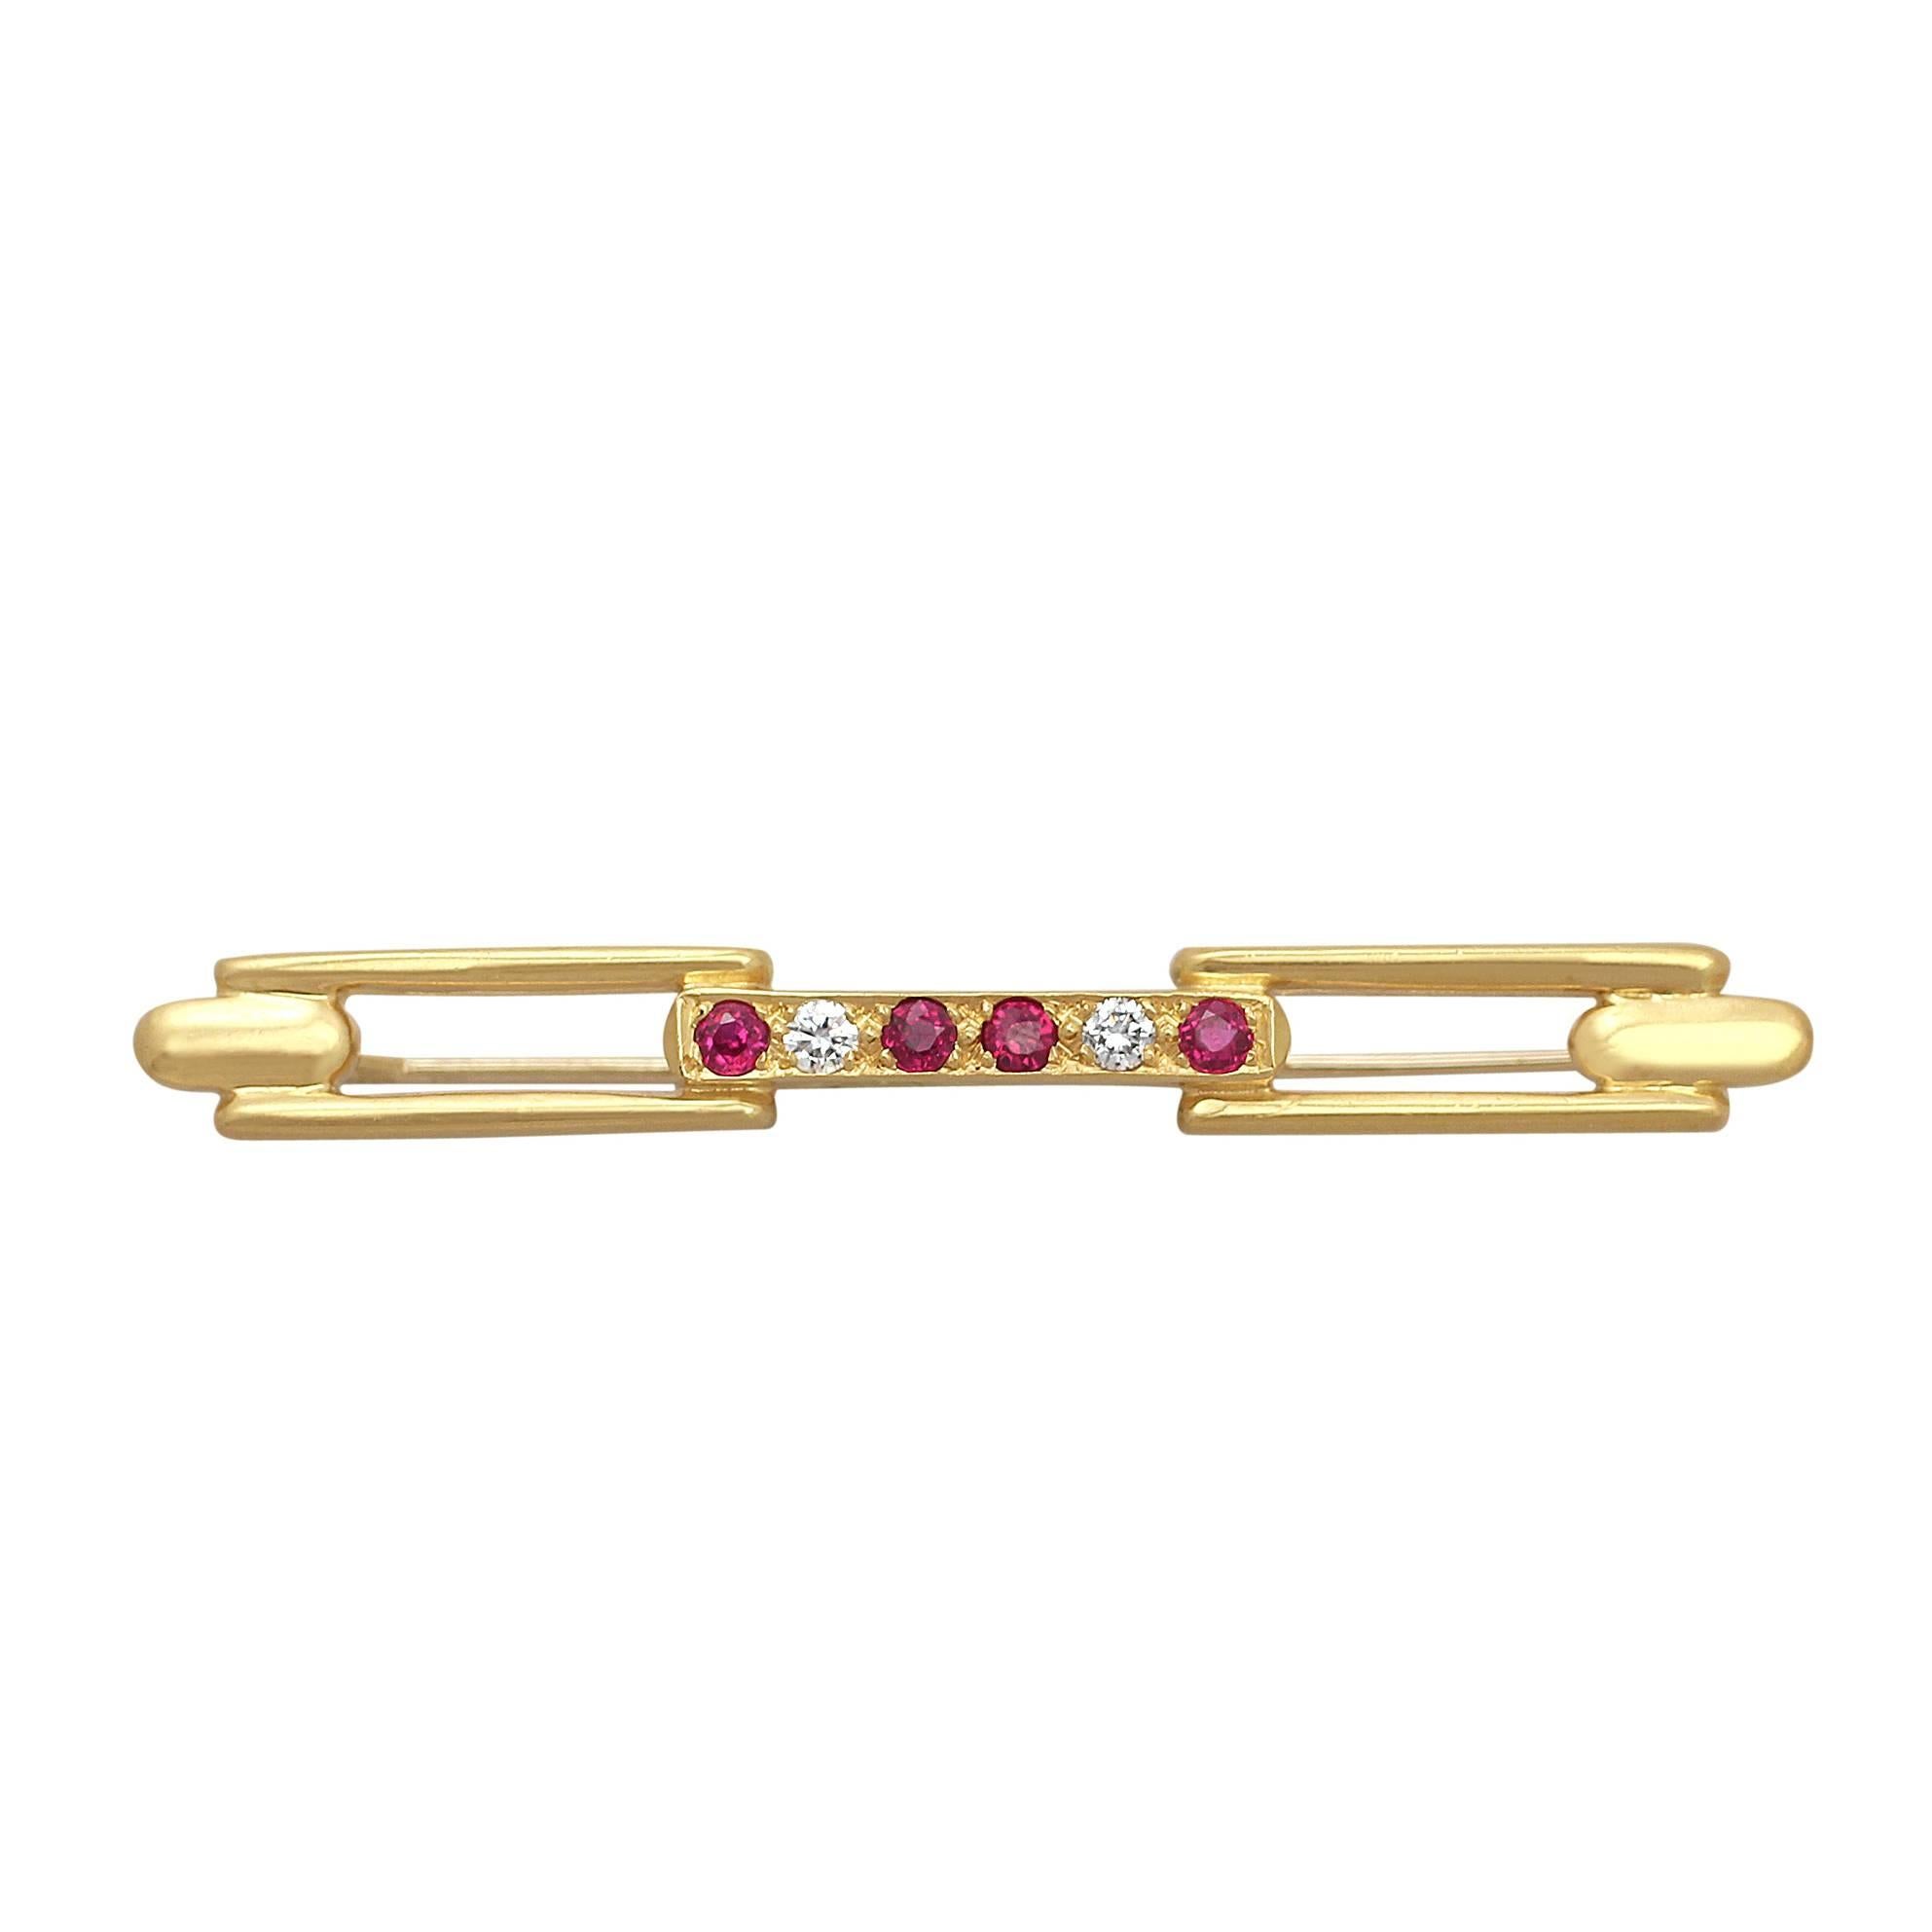 0.12 Ct Ruby, Diamond and 18 k Yellow Gold Brooch - Art Deco Style